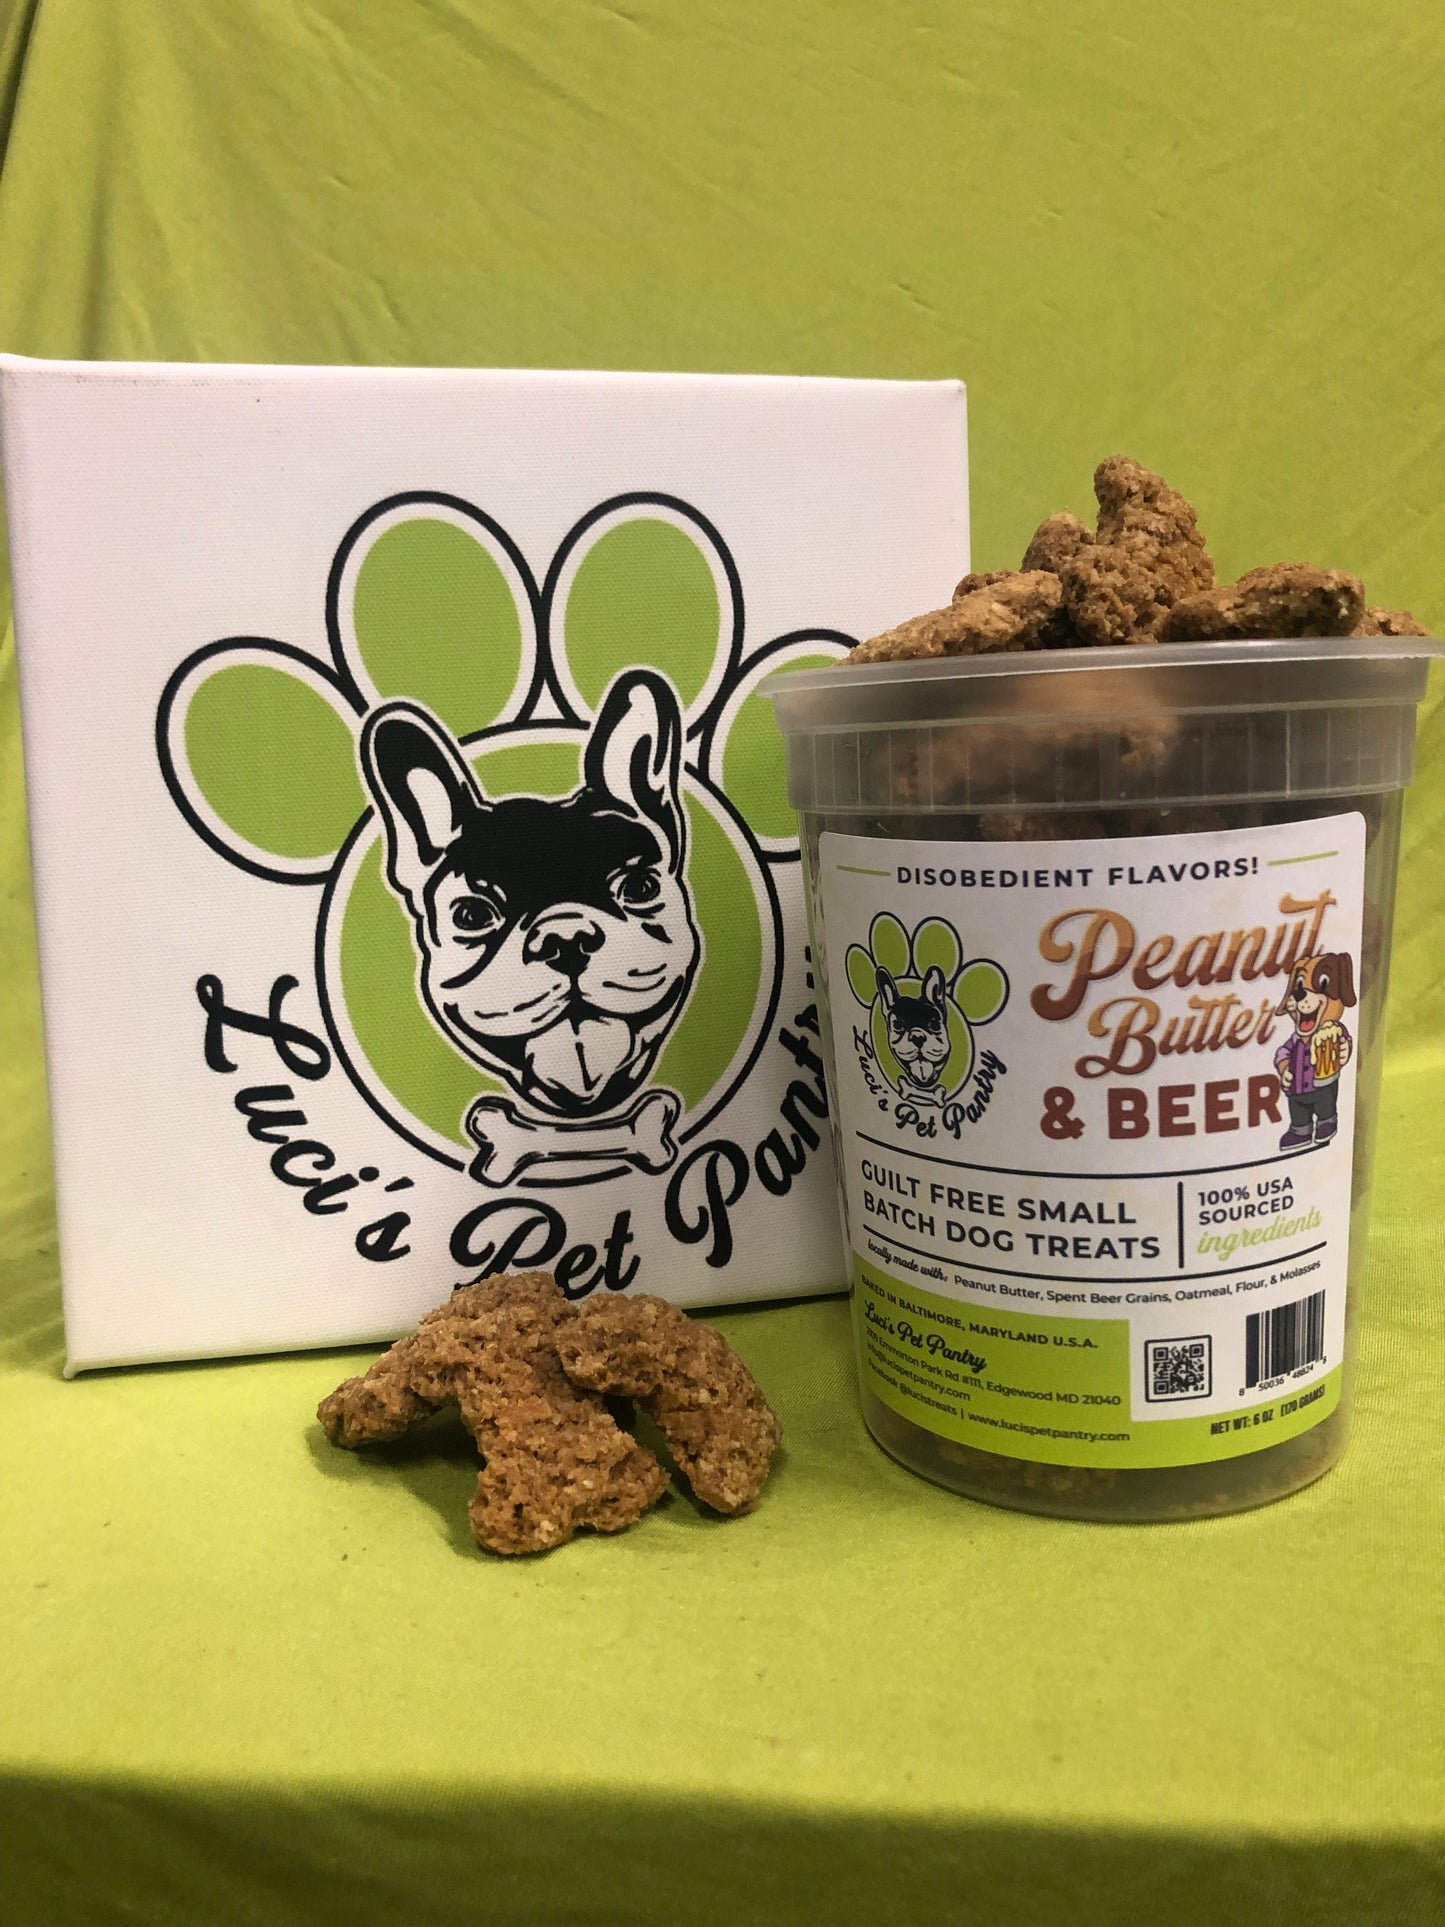 Peanut Butter & Beer - All Natural "Peanut Butter & Spent Grain" Dog & Puppy Treats - Disobedient Tub of Biscuits